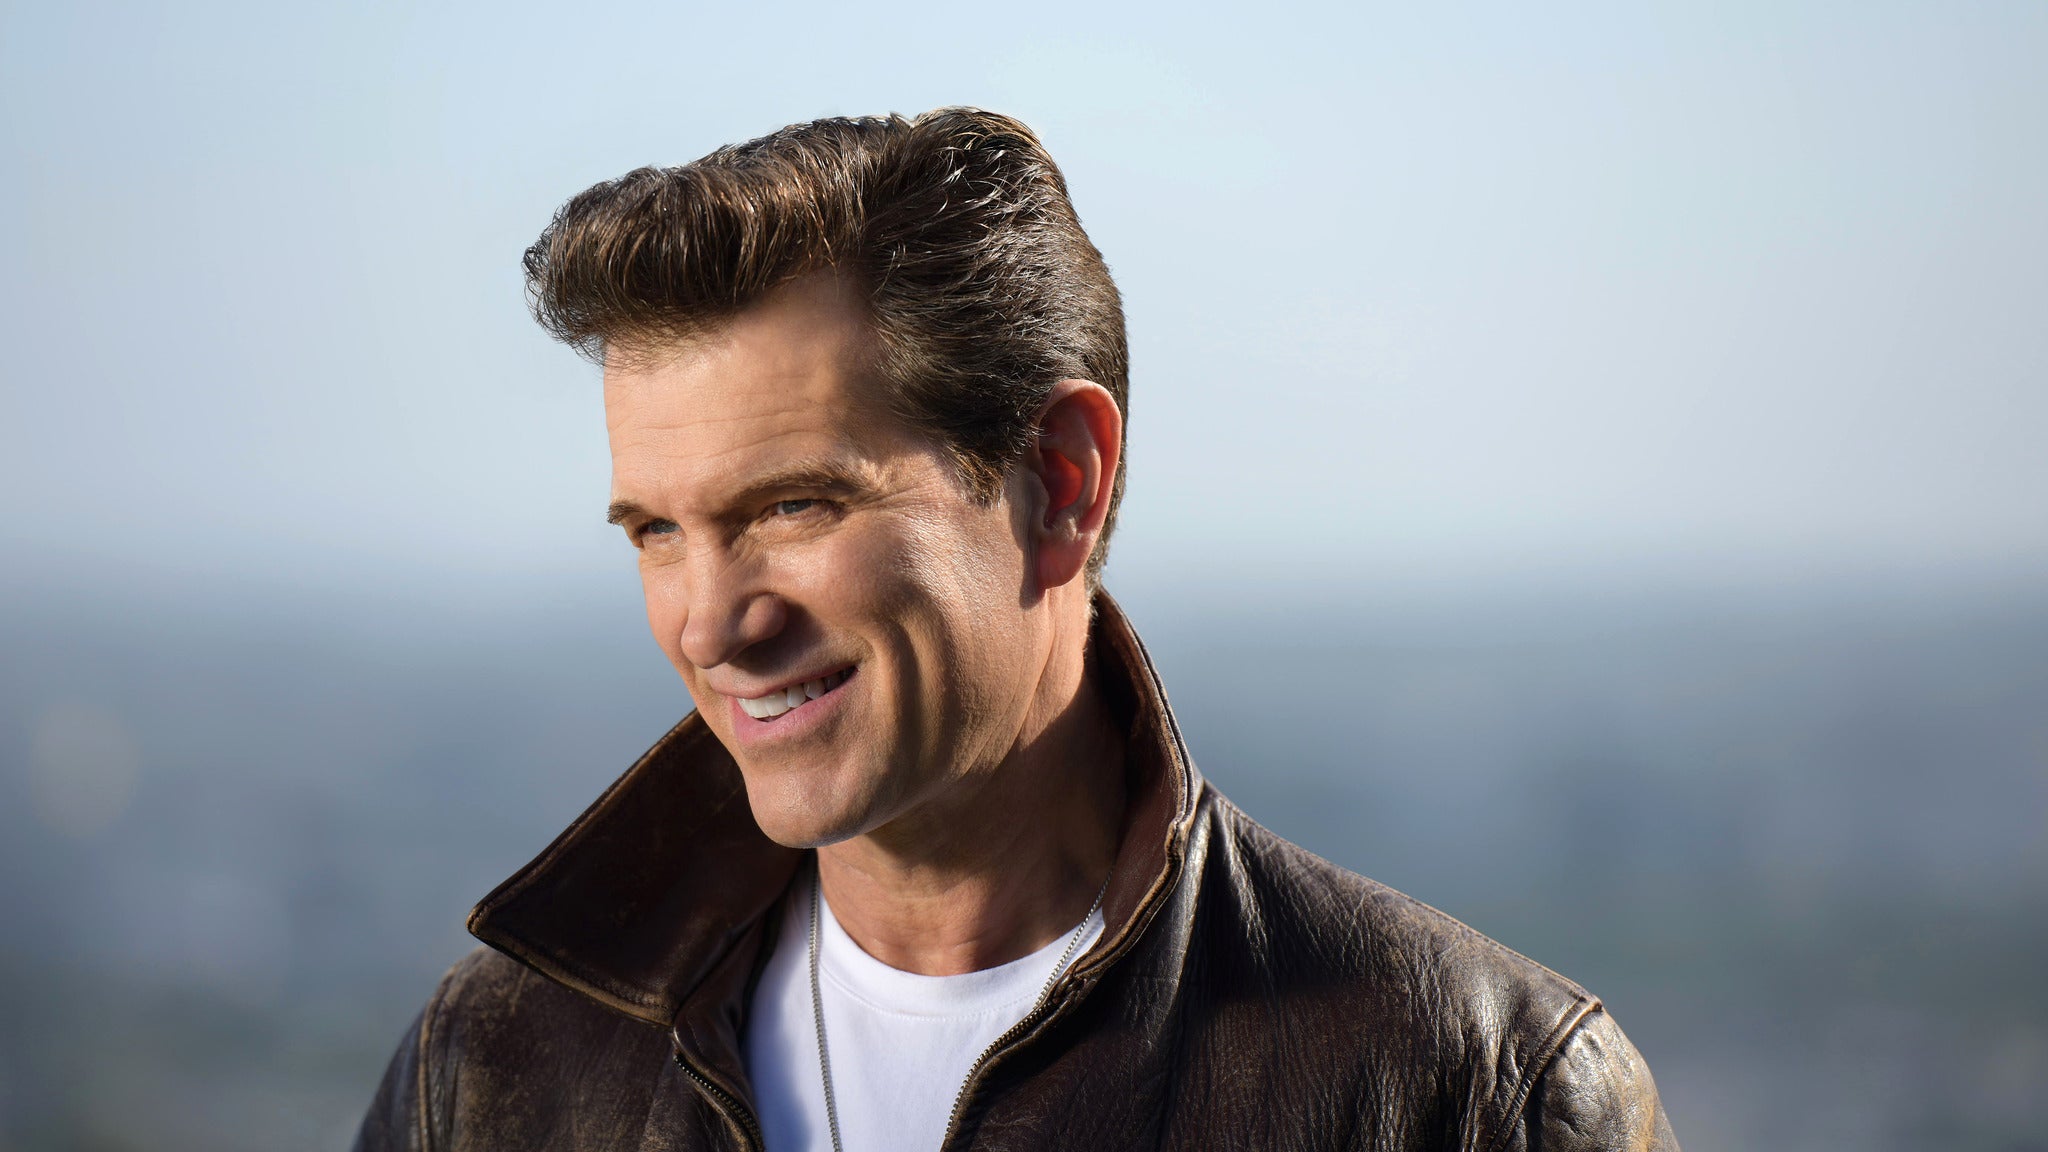 Image used with permission from Ticketmaster | Chris Isaak tickets